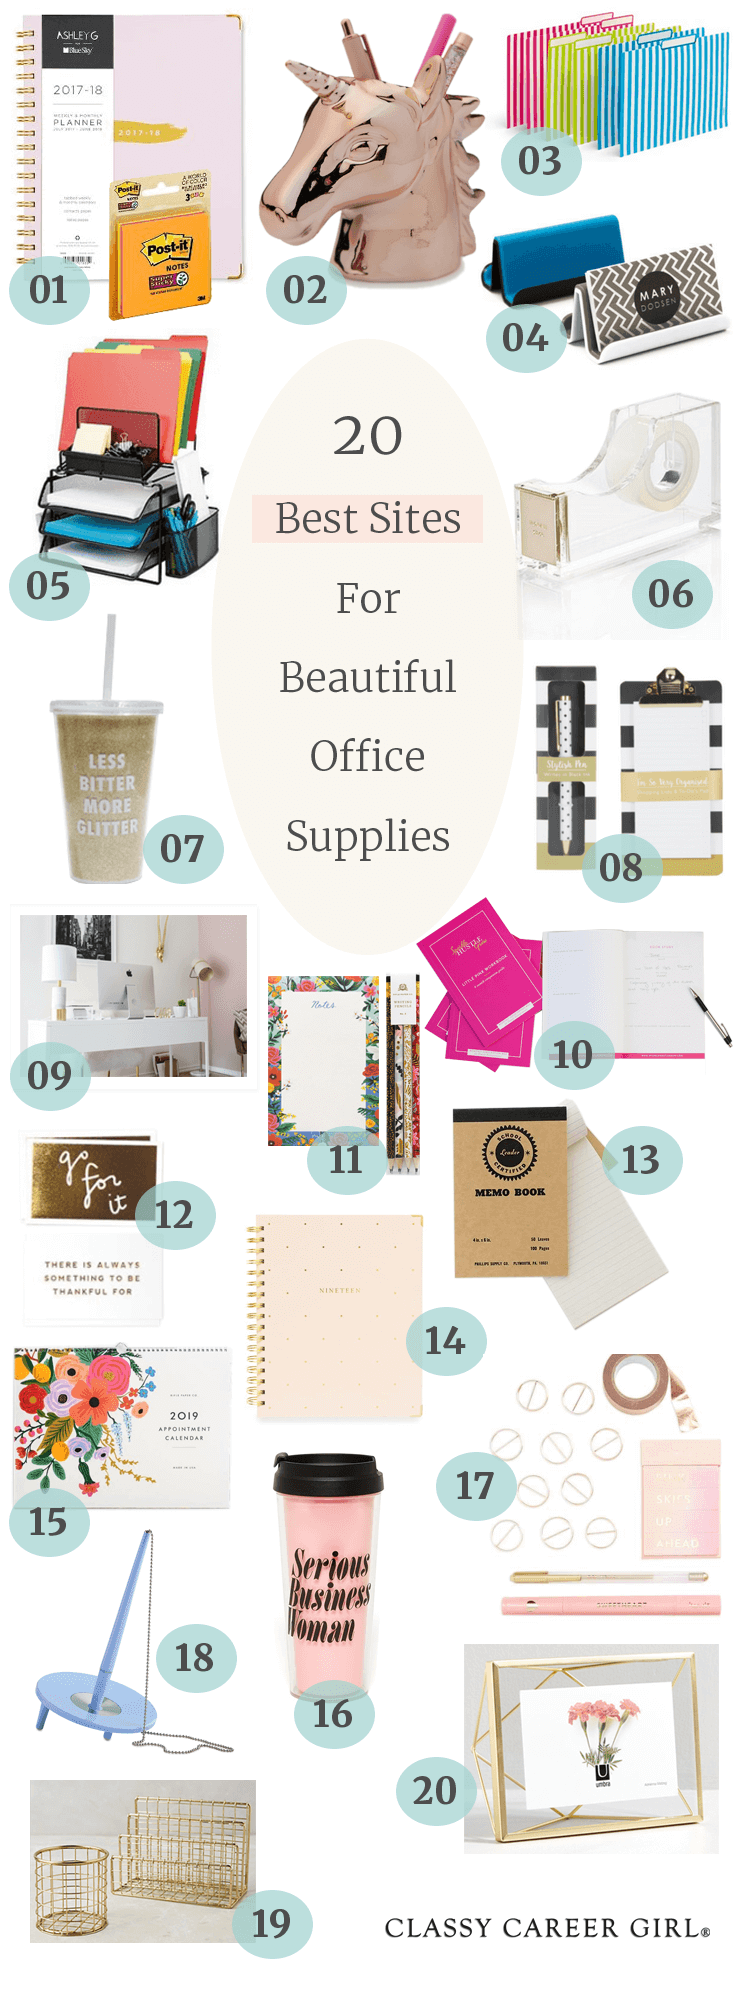 20 Best Sites For Gorgeous Office Supplies Classy Career Girl